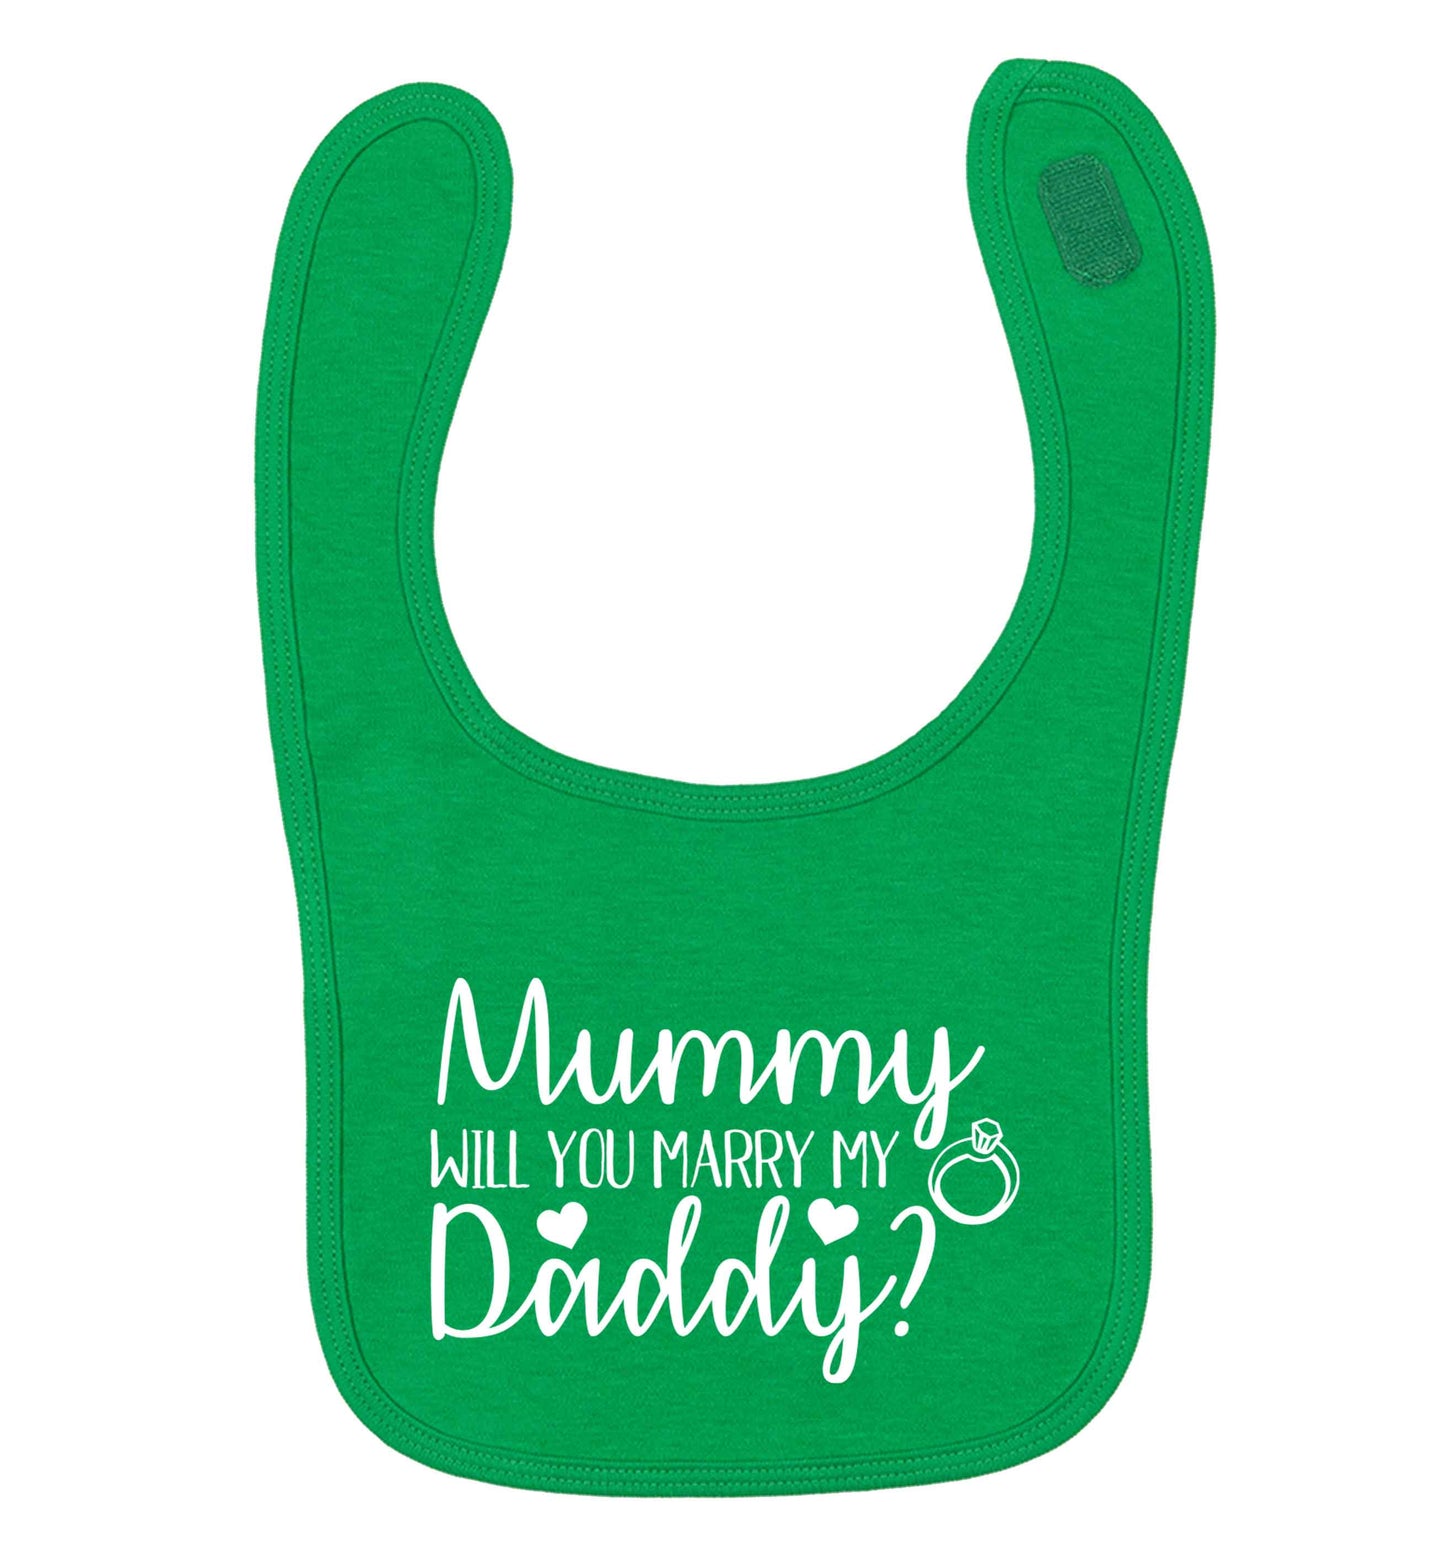 Looking for a unique way to pop the question? Why not let your kids do it!  green baby bib